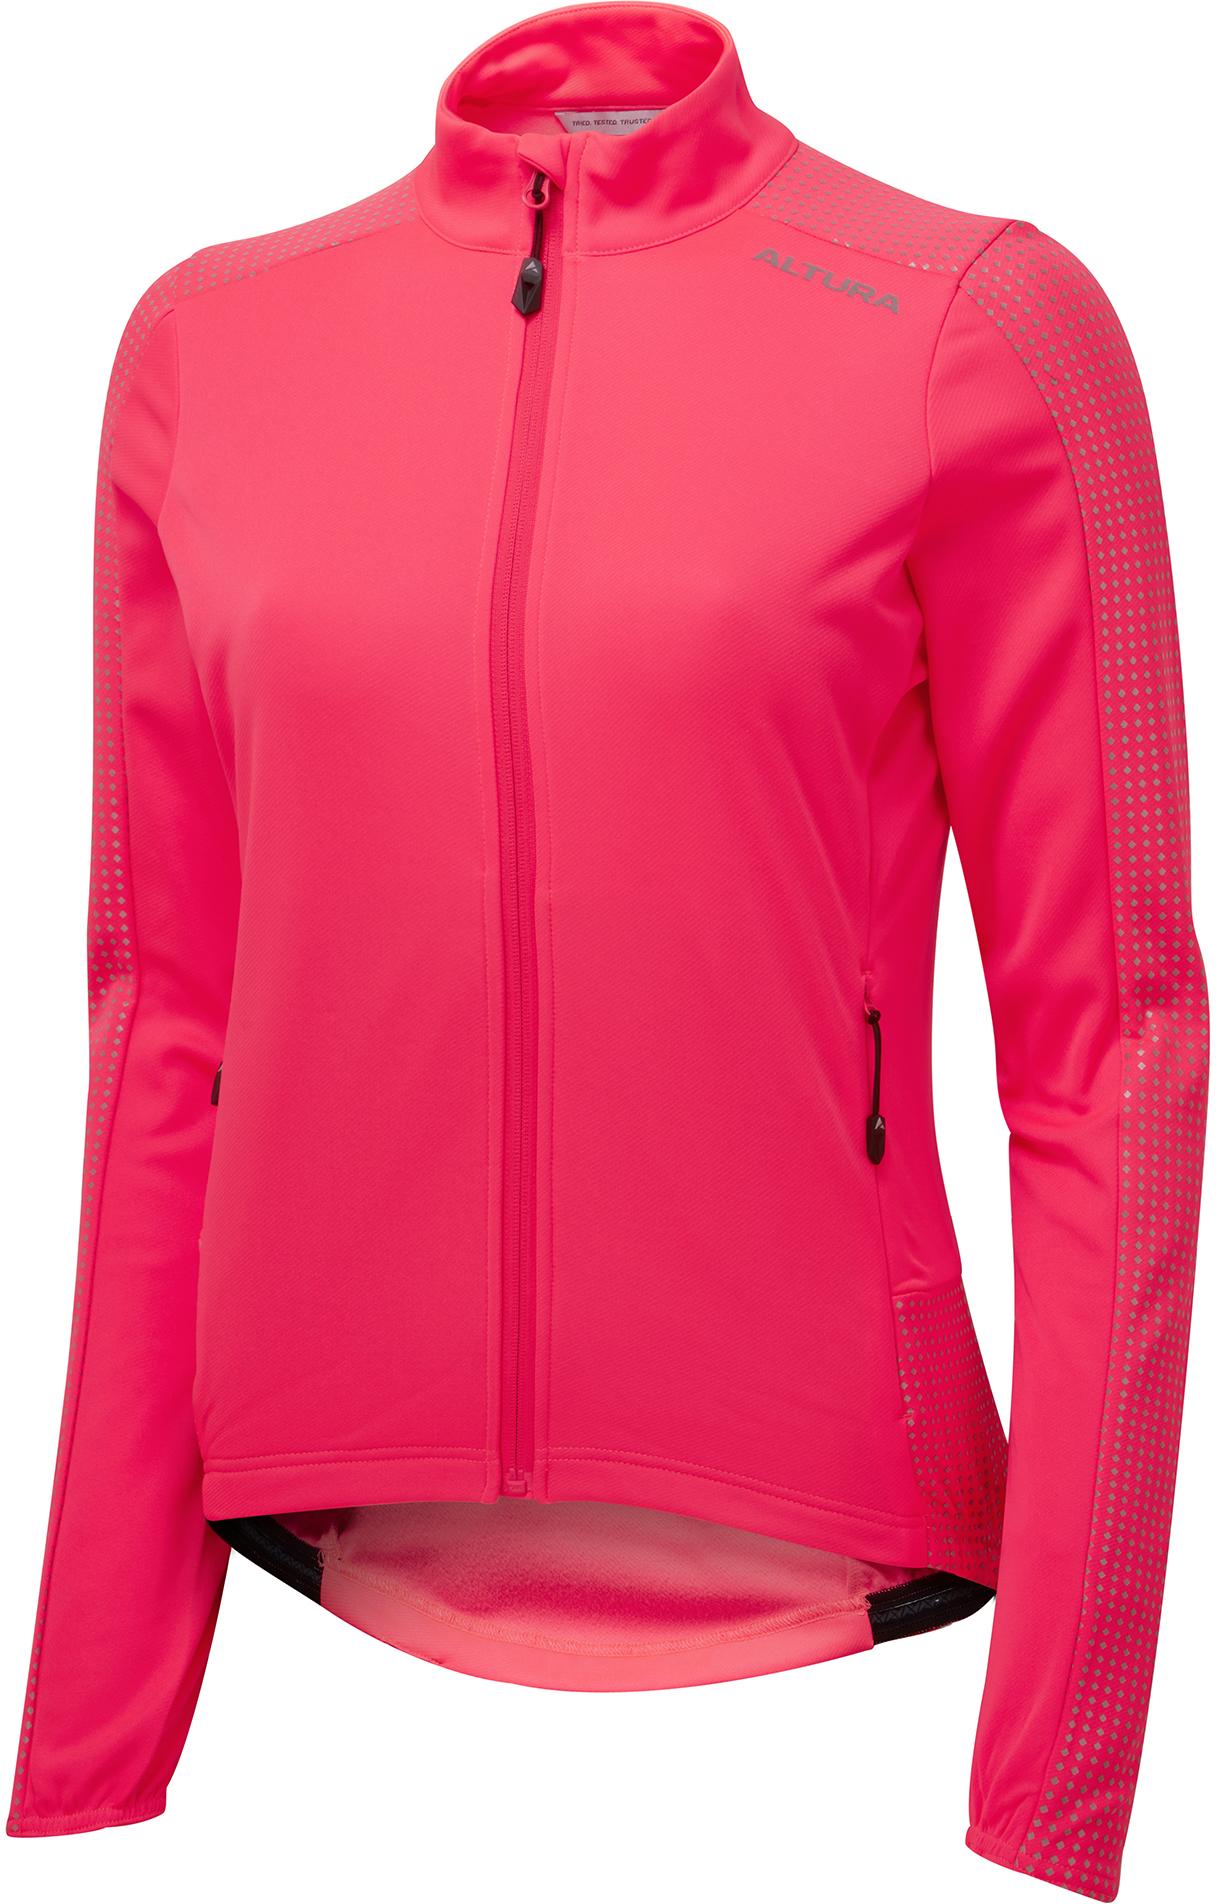 Altura Nightvision Women's Long Sleeve Jersey Pink 14